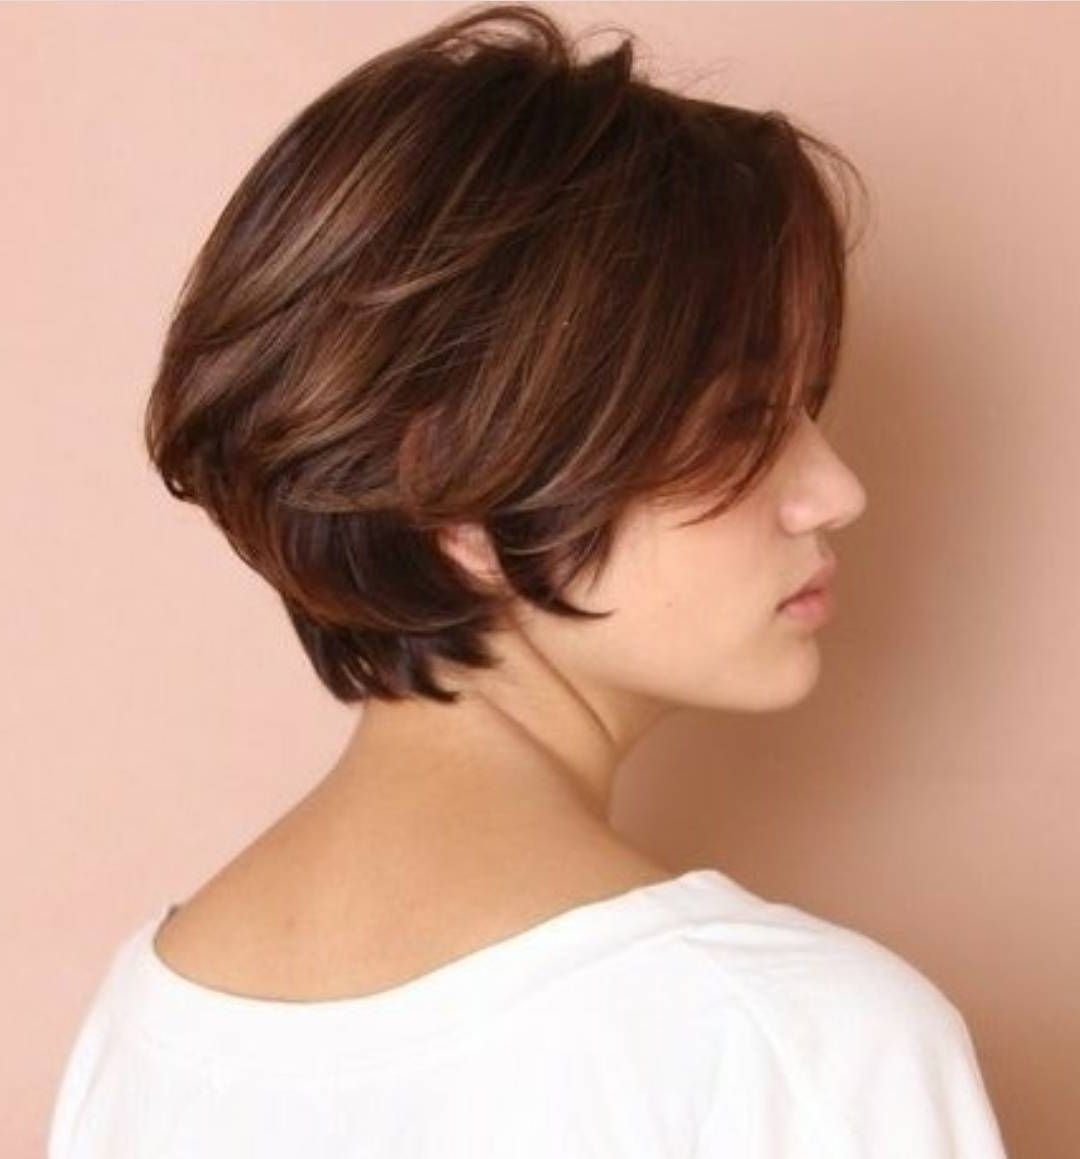 10 Chic Short Bob Haircuts That Balance Your Face Shape! – Short With Regard To Everyday Updos For Short Hair (View 15 of 15)